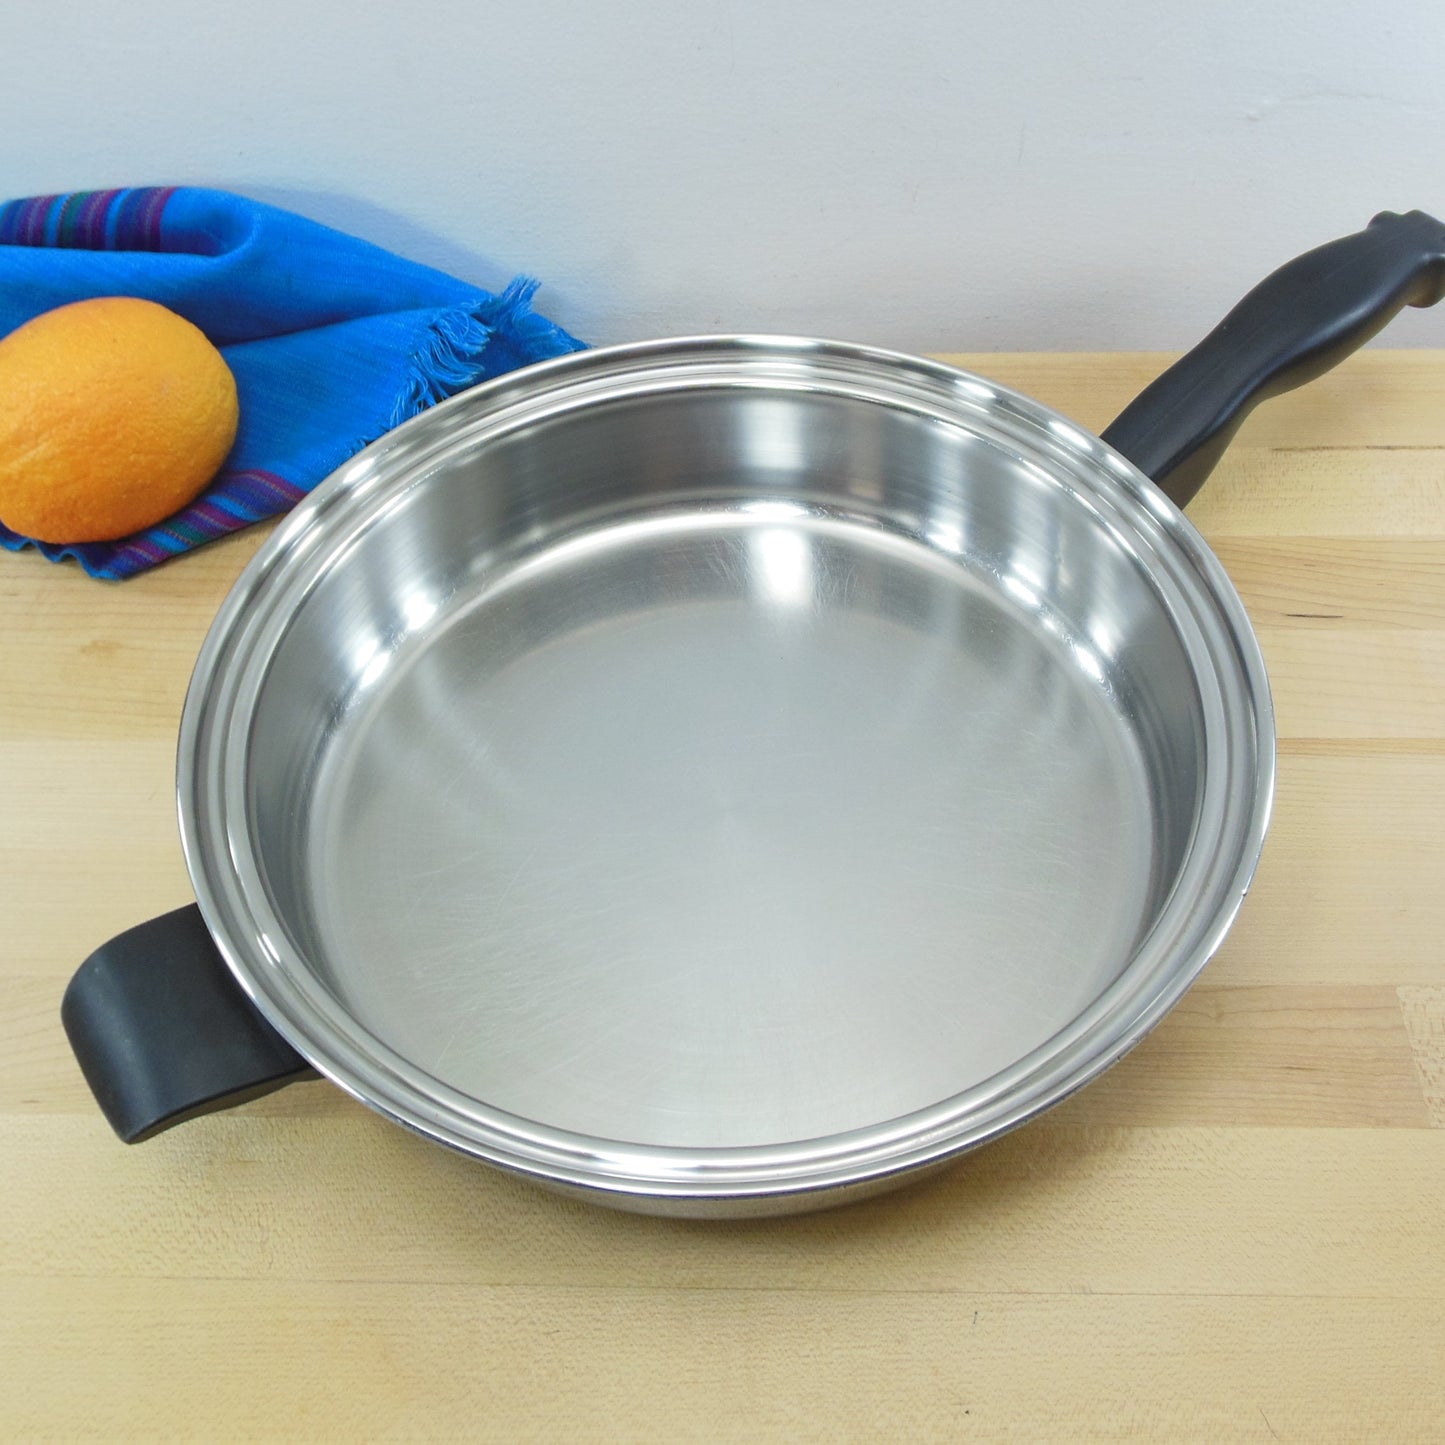 Cutco USA 5 Ply Stainless 11.5" Open Fry Pan Skillet